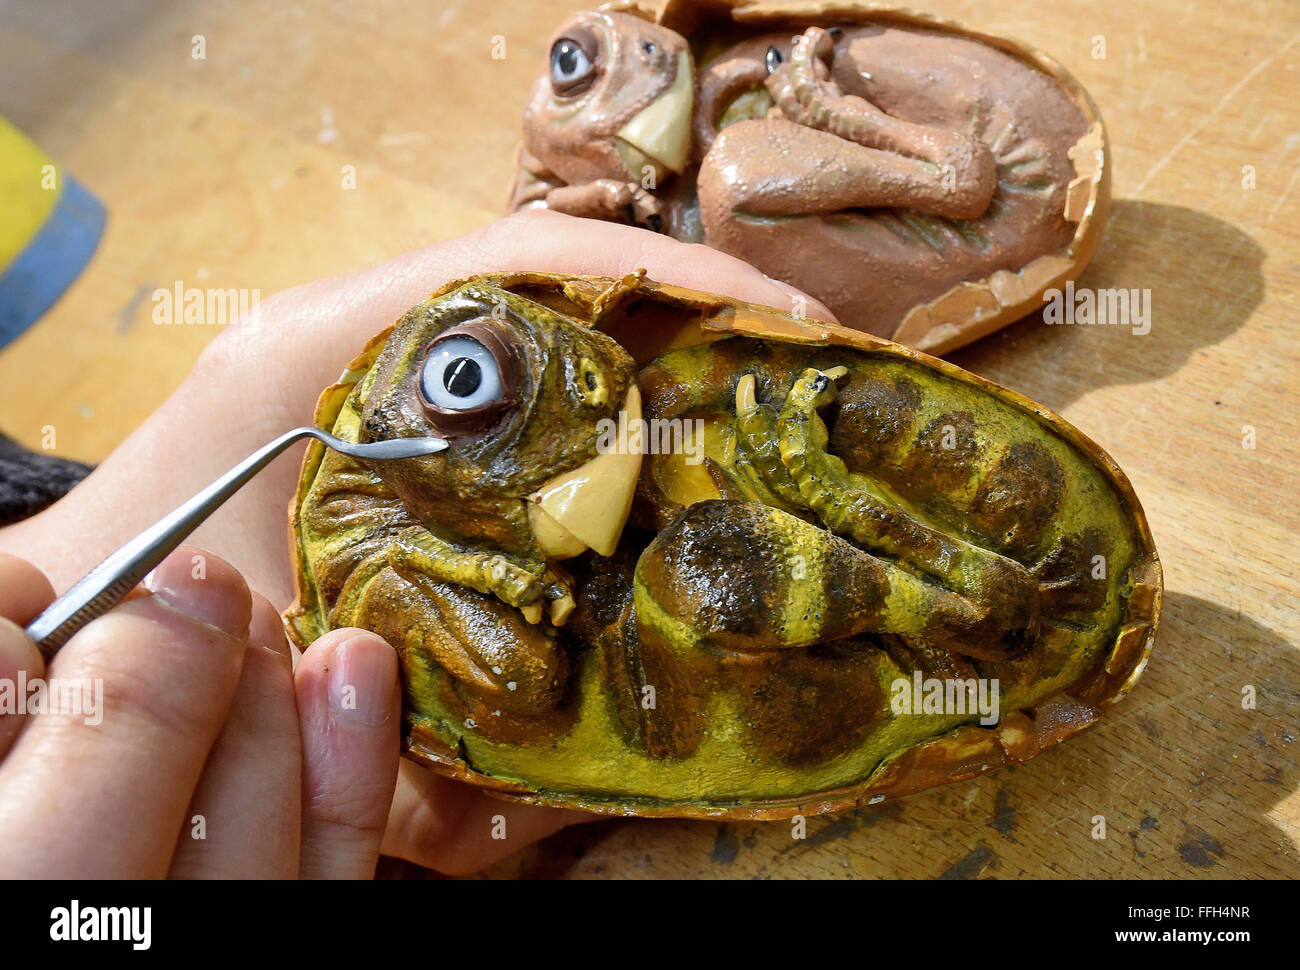 Muenchehagen, Germany. 11th Feb, 2016. A staff member prepares the replication of a embryo of a T-res dinosaur for the Dinosaur exhibition at the Dinopark in Muenchehagen, Germany, 11 February 2016. The exhibition presents insights into the family life of dinosaurs, including rare dinosaur baby fossiles and their find spot. PHOTO: HOLGER HOLLEMANN/dpa/Alamy Live News Stock Photo